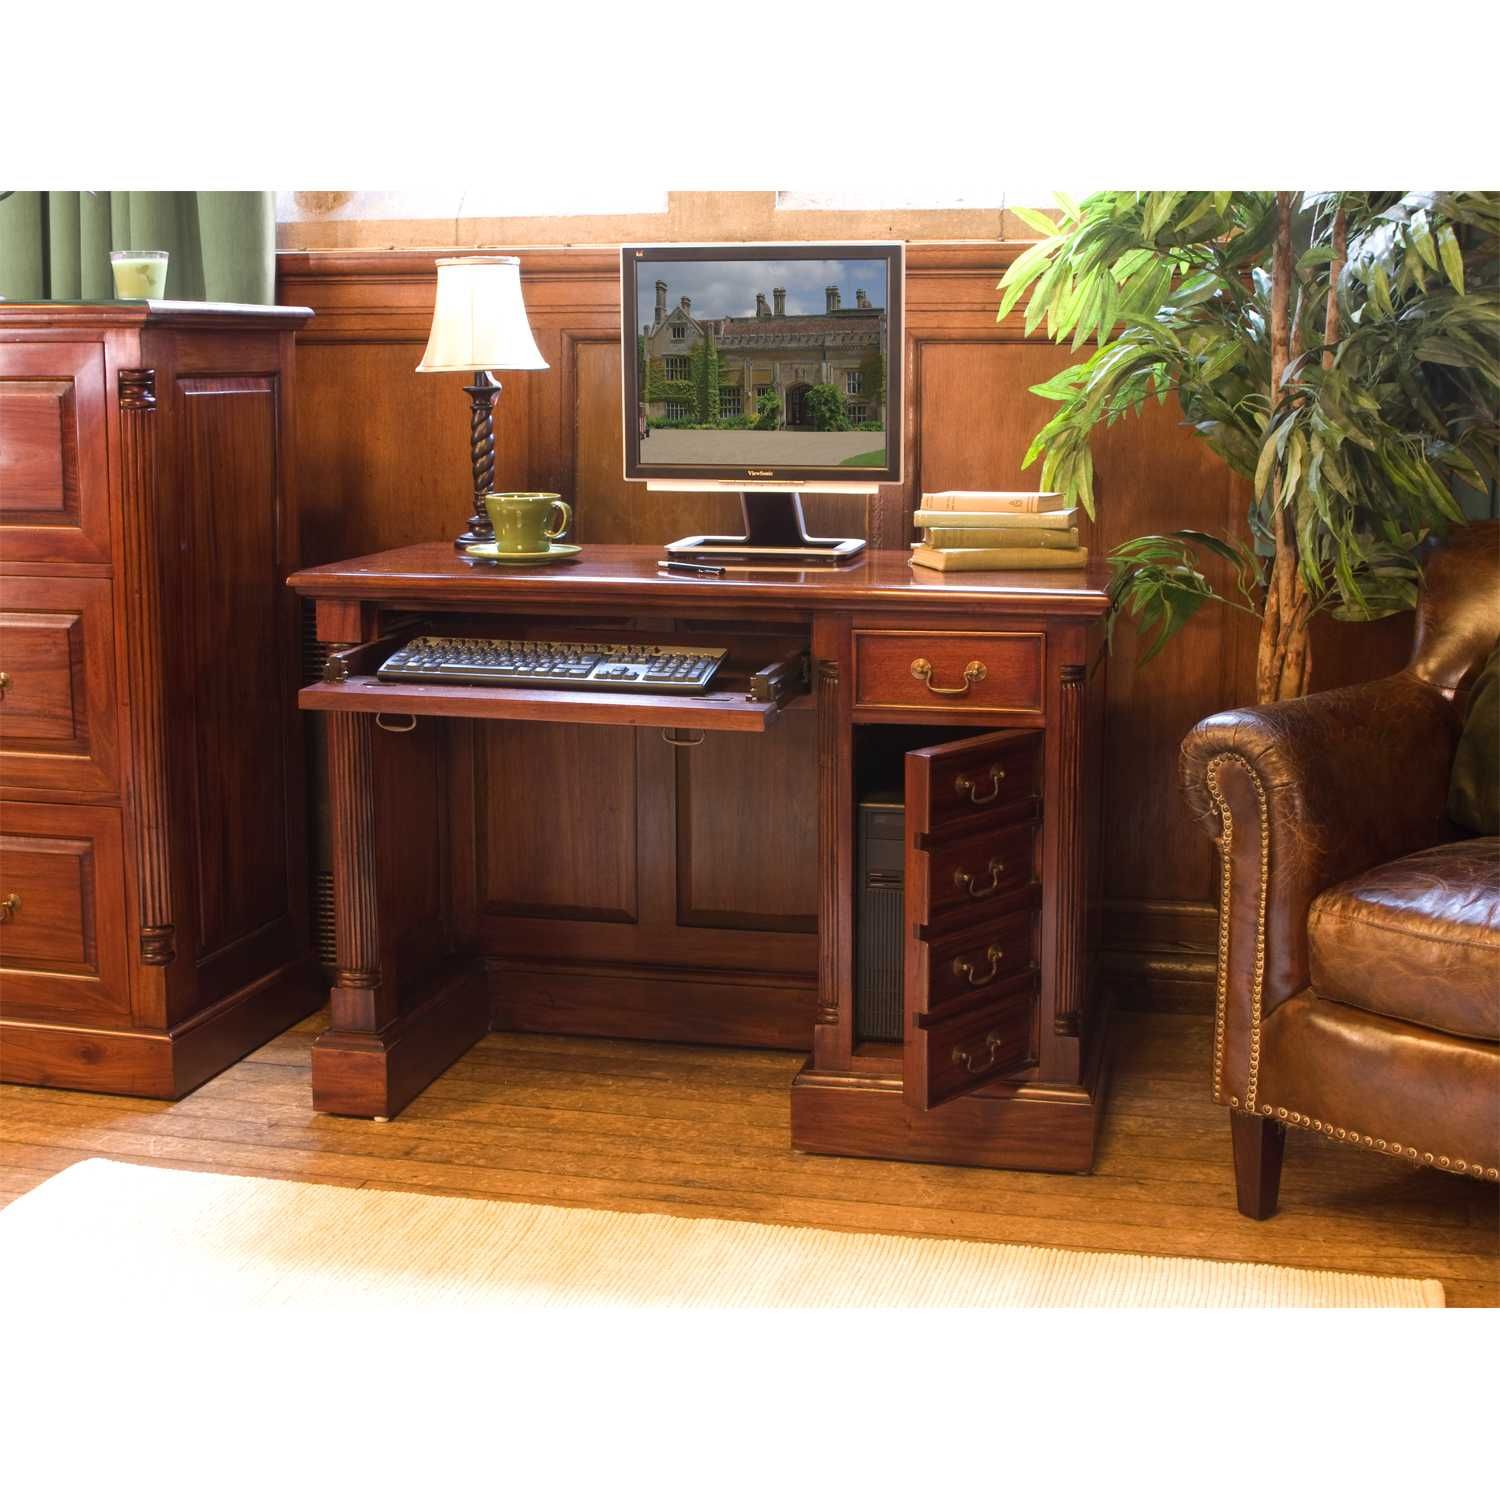 Mahogany Dark Wood Single Pedestal Computer Desk With Keyboard Tray And With Regard To Wood And Metal Keyboard Tray Computer Desks (View 7 of 15)